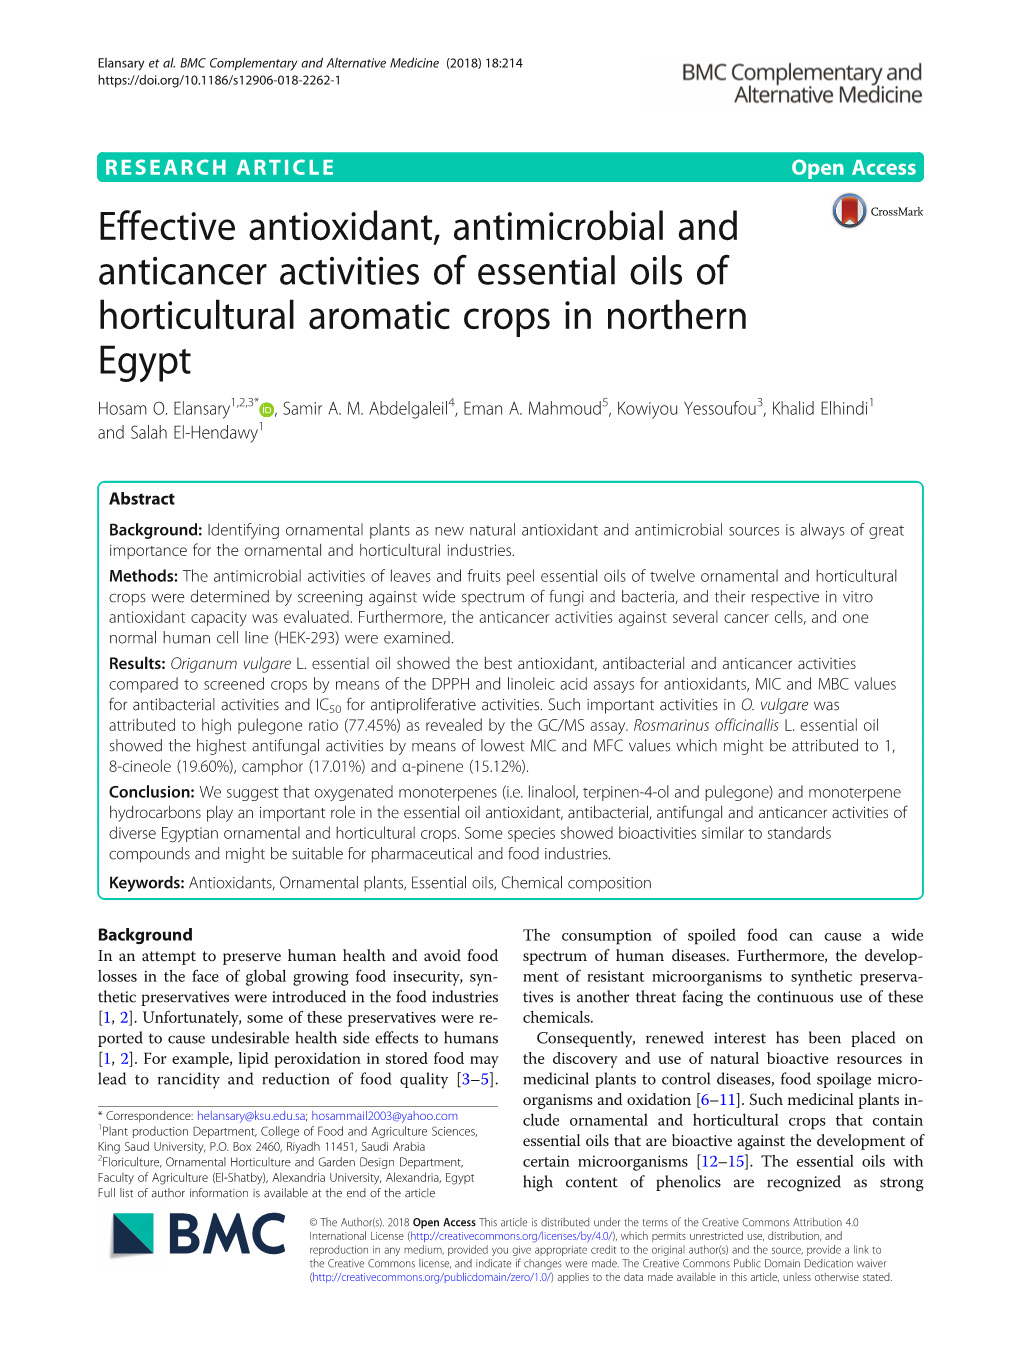 Effective Antioxidant, Antimicrobial and Anticancer Activities of Essential Oils of Horticultural Aromatic Crops in Northern Egypt Hosam O